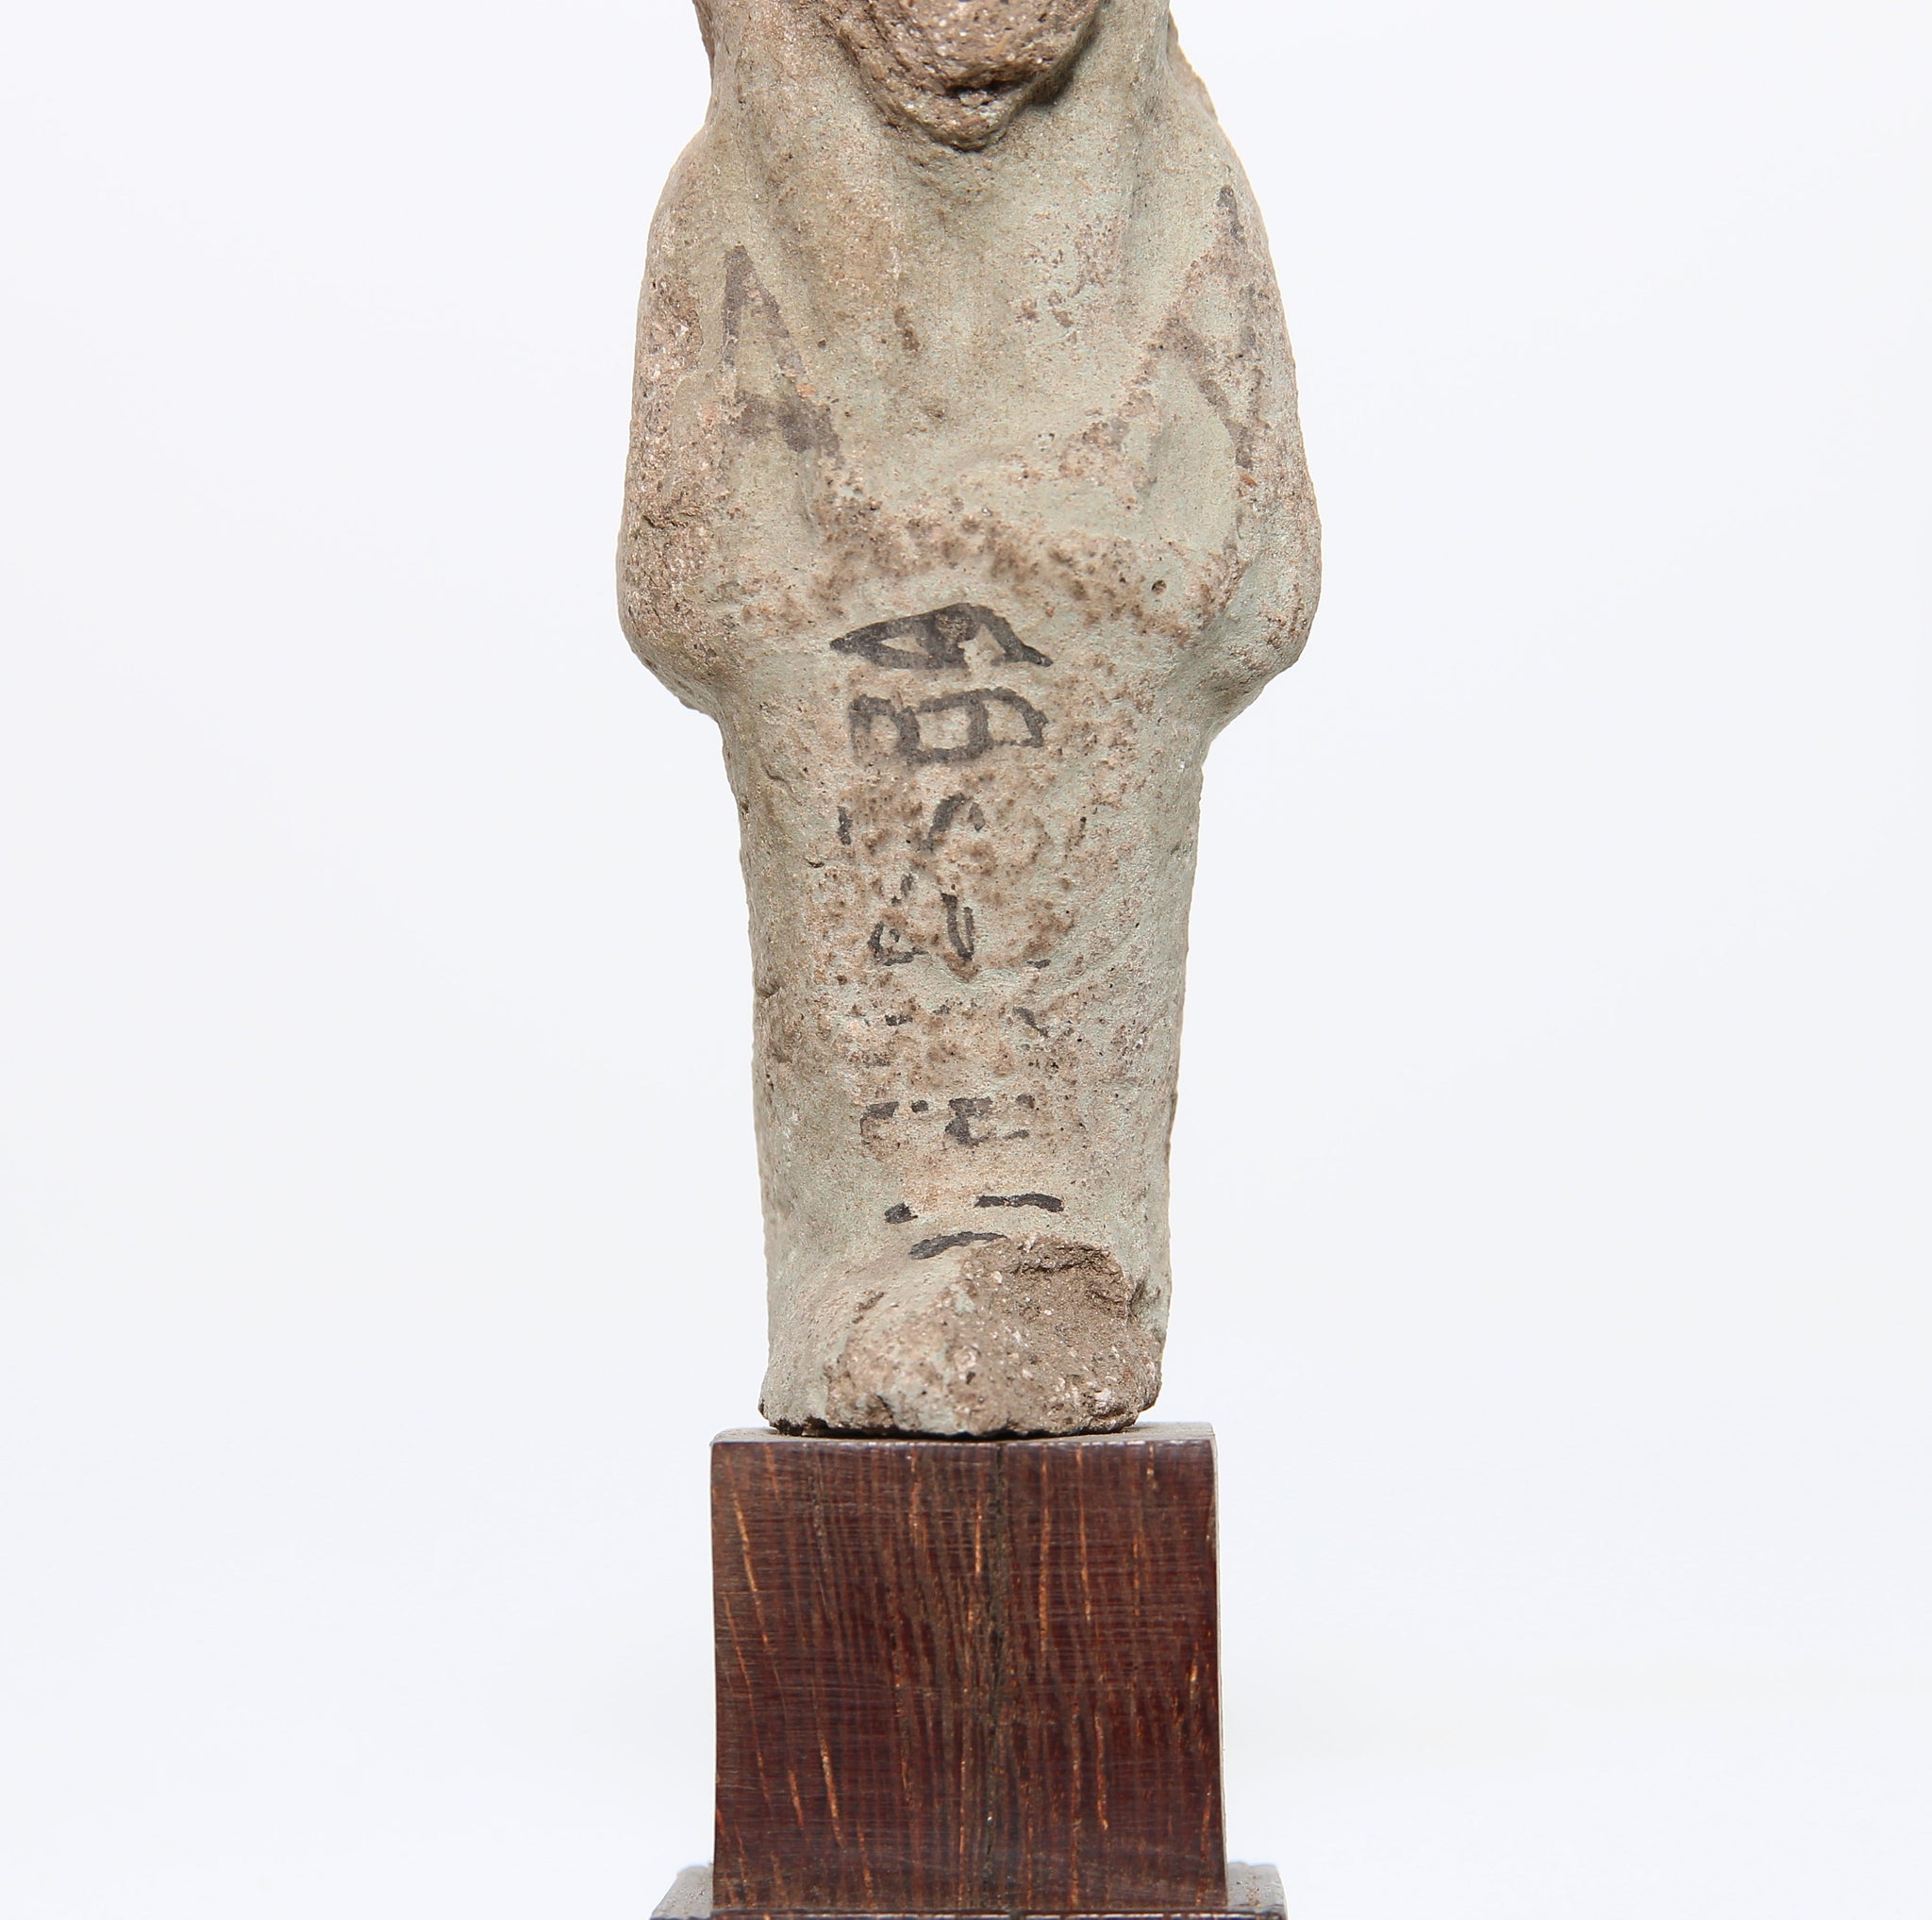 A pottery shabti figure with painted inscription | Egypt, Third Intermediate Period, 1050-730 BC